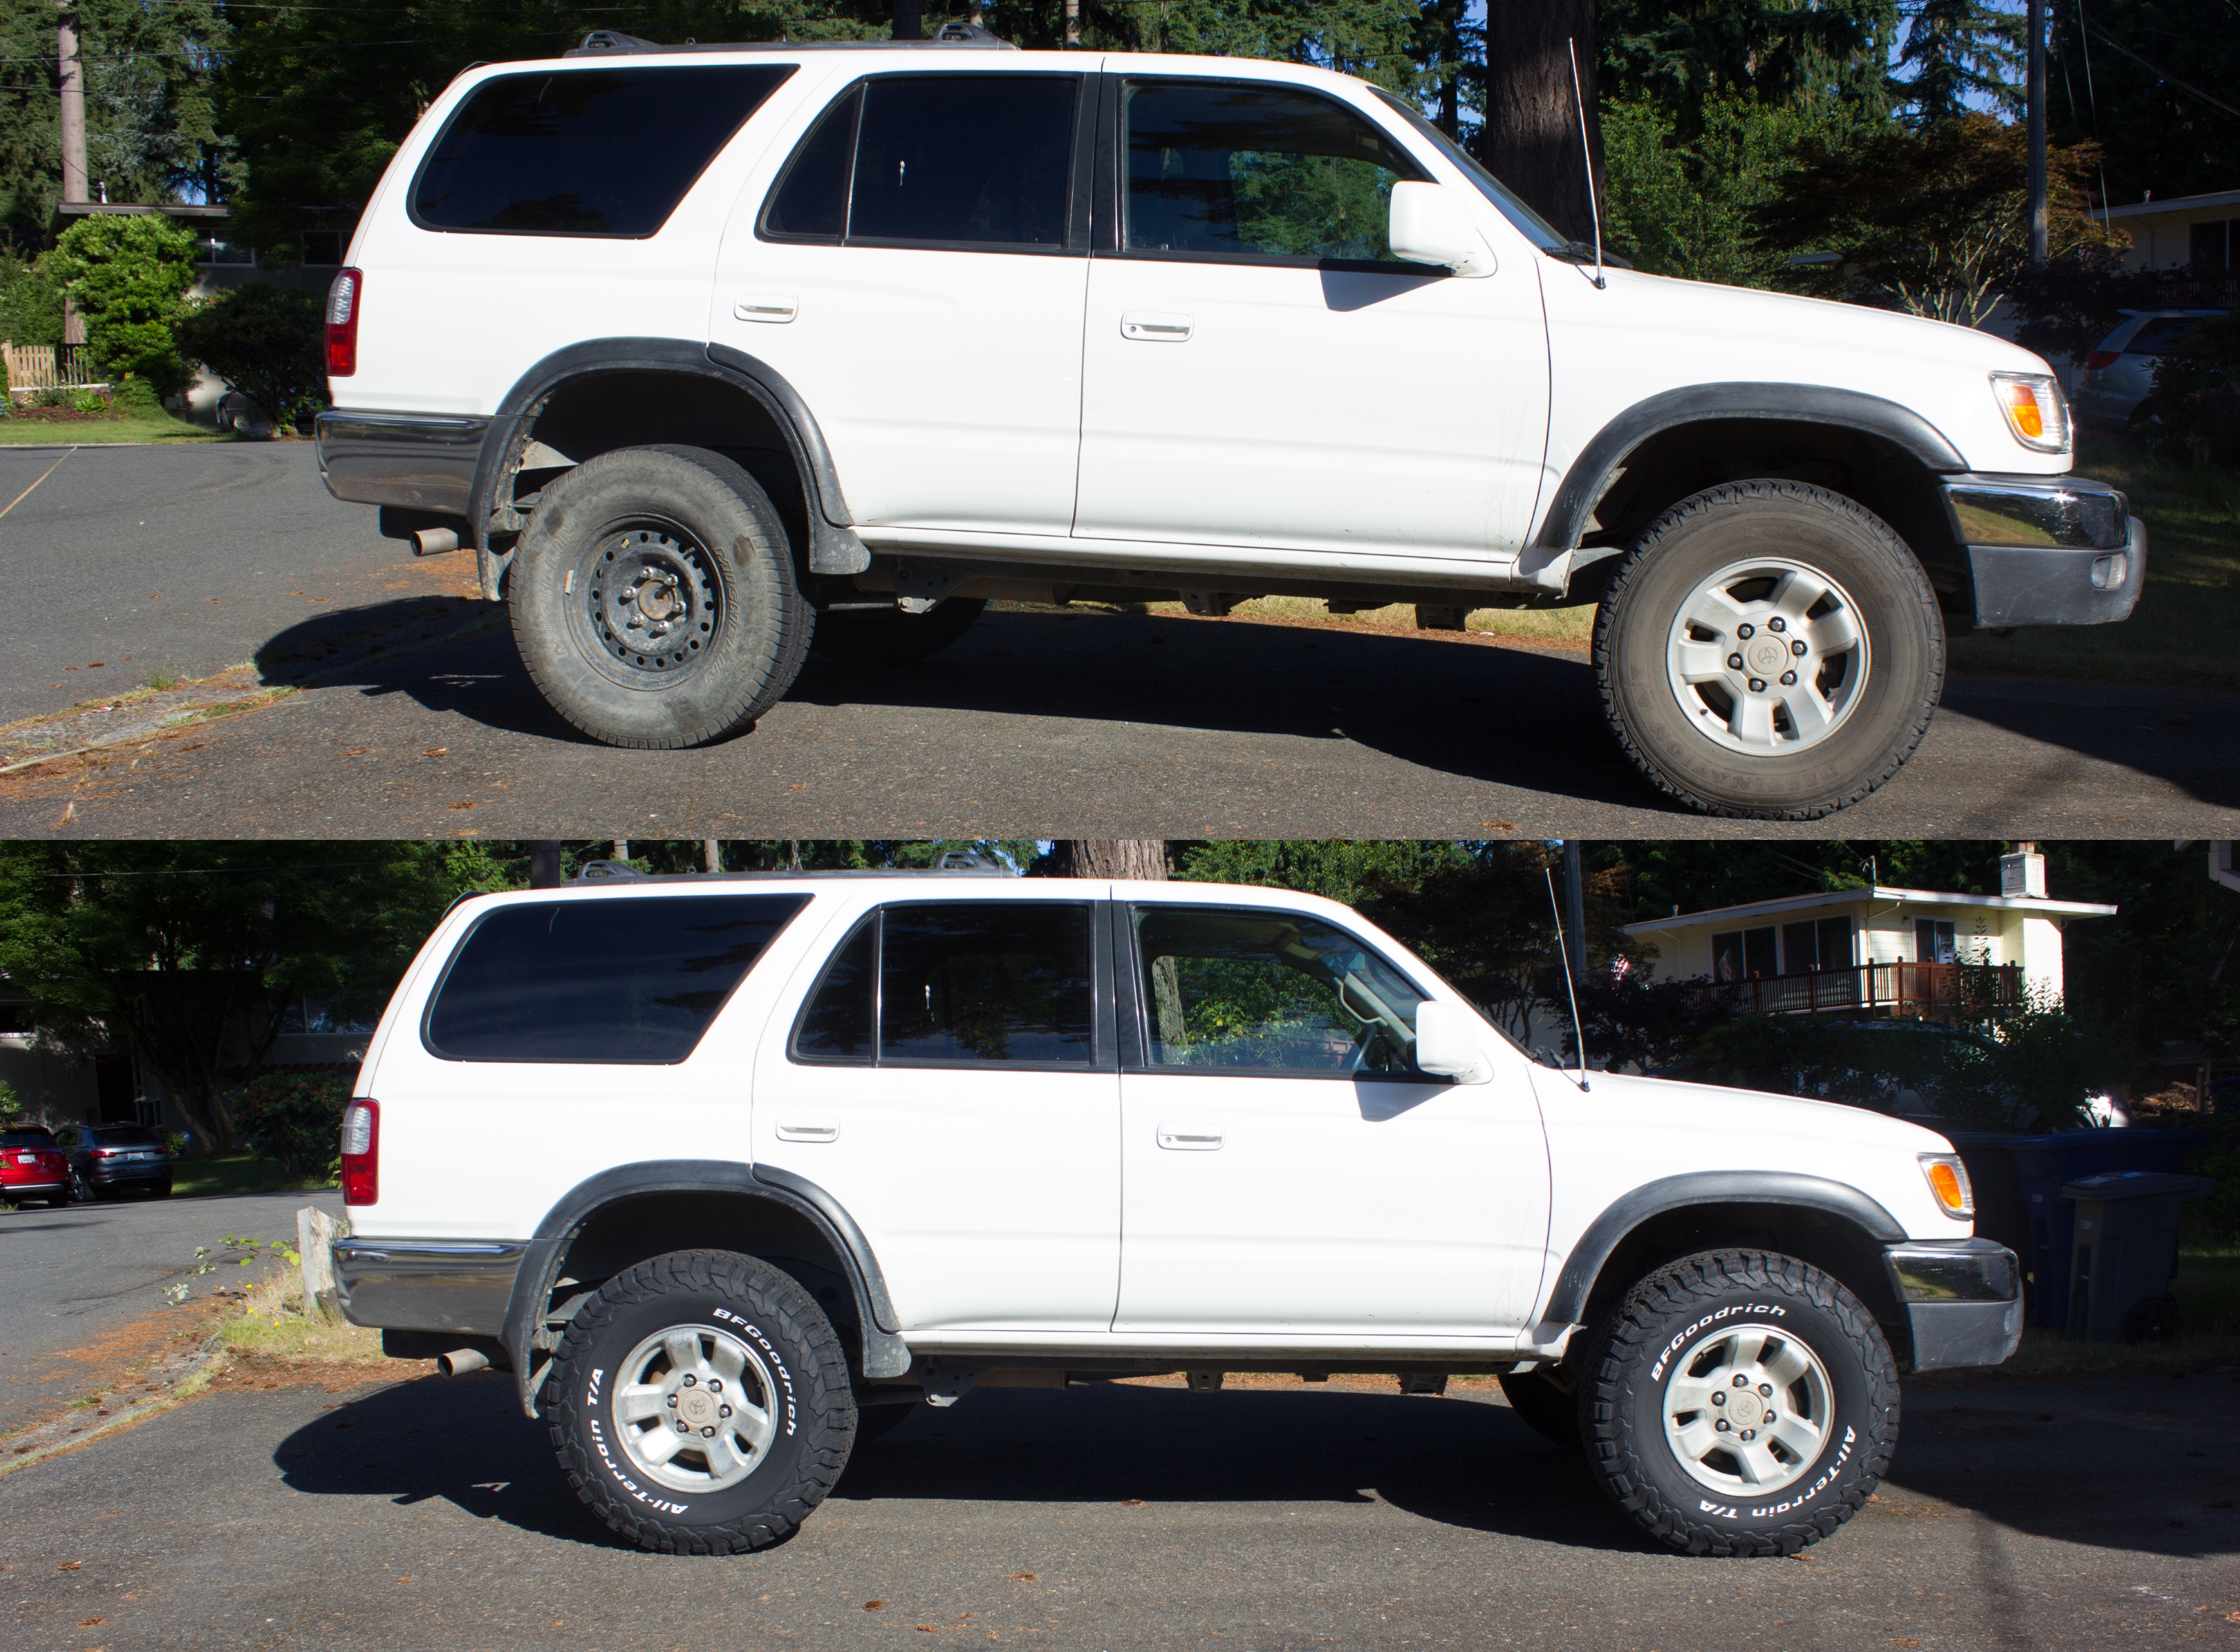 Pics And Thoughts After Upgrading To 32 265 75 16 Lt Tires Toyota 4runner Forum Largest 4runner Forum